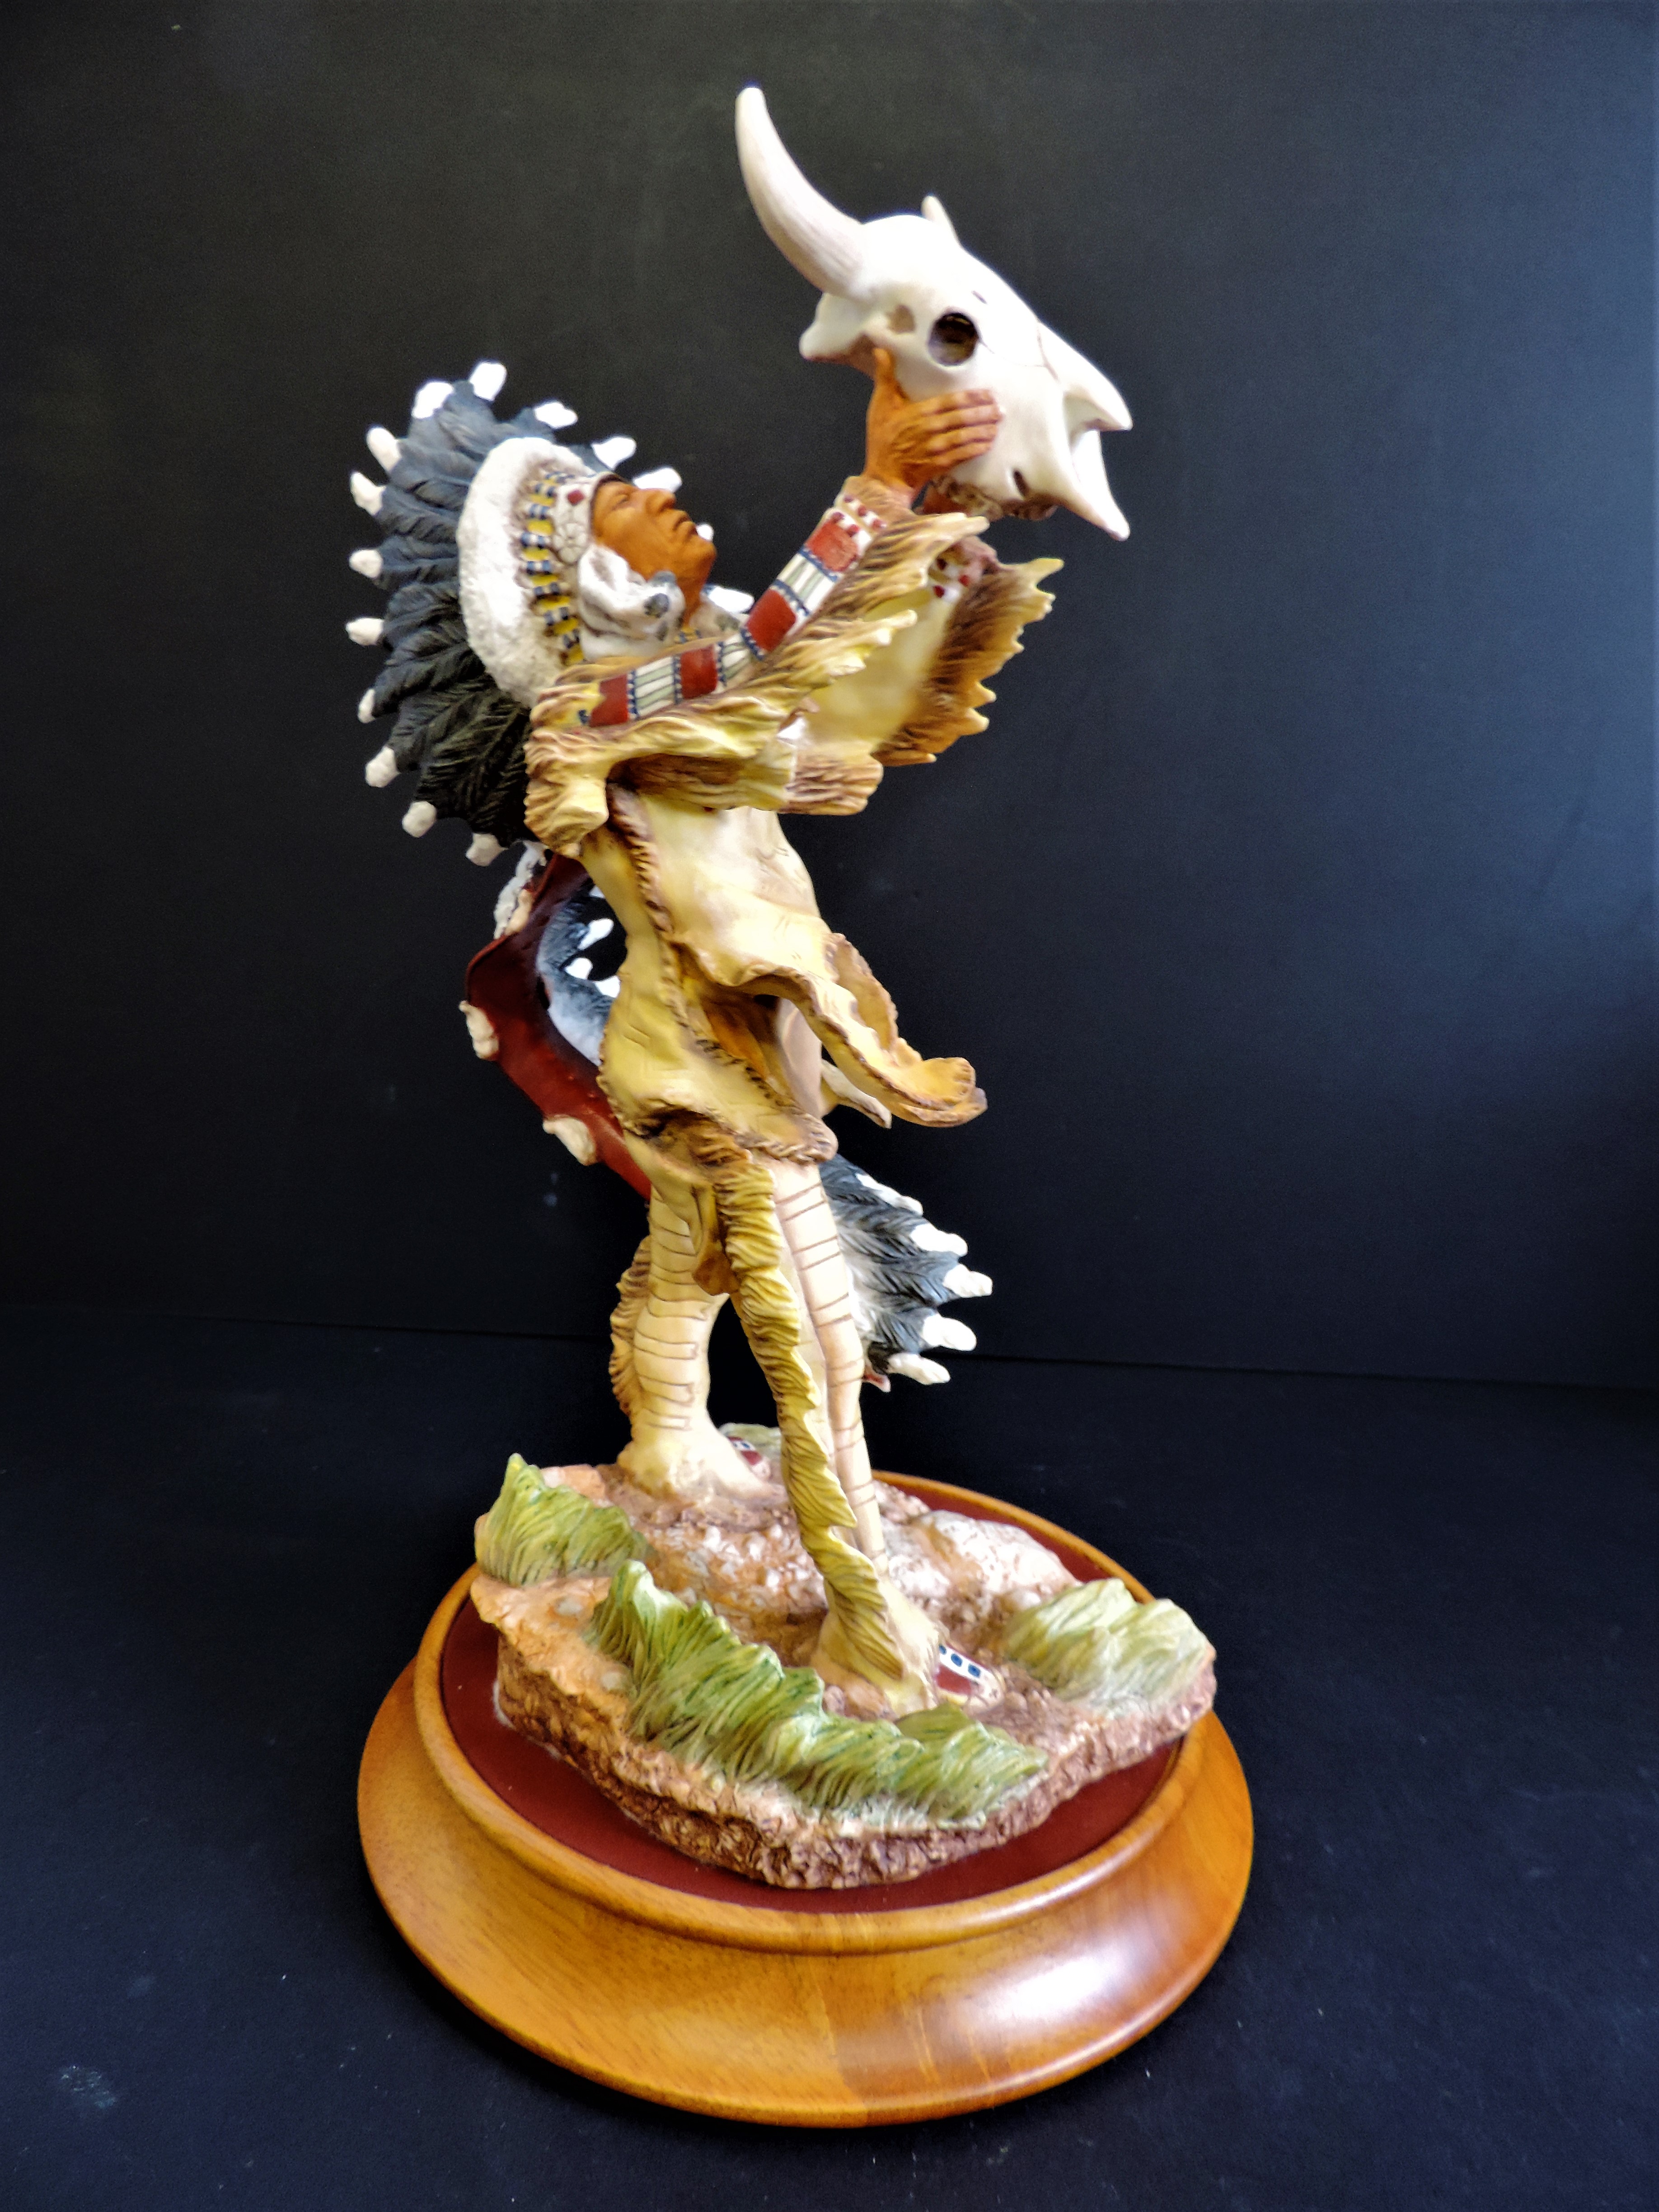 Franklin Mint Prayer to the Great Spirit Porcelain Sculpture - Very Rare - Image 6 of 8